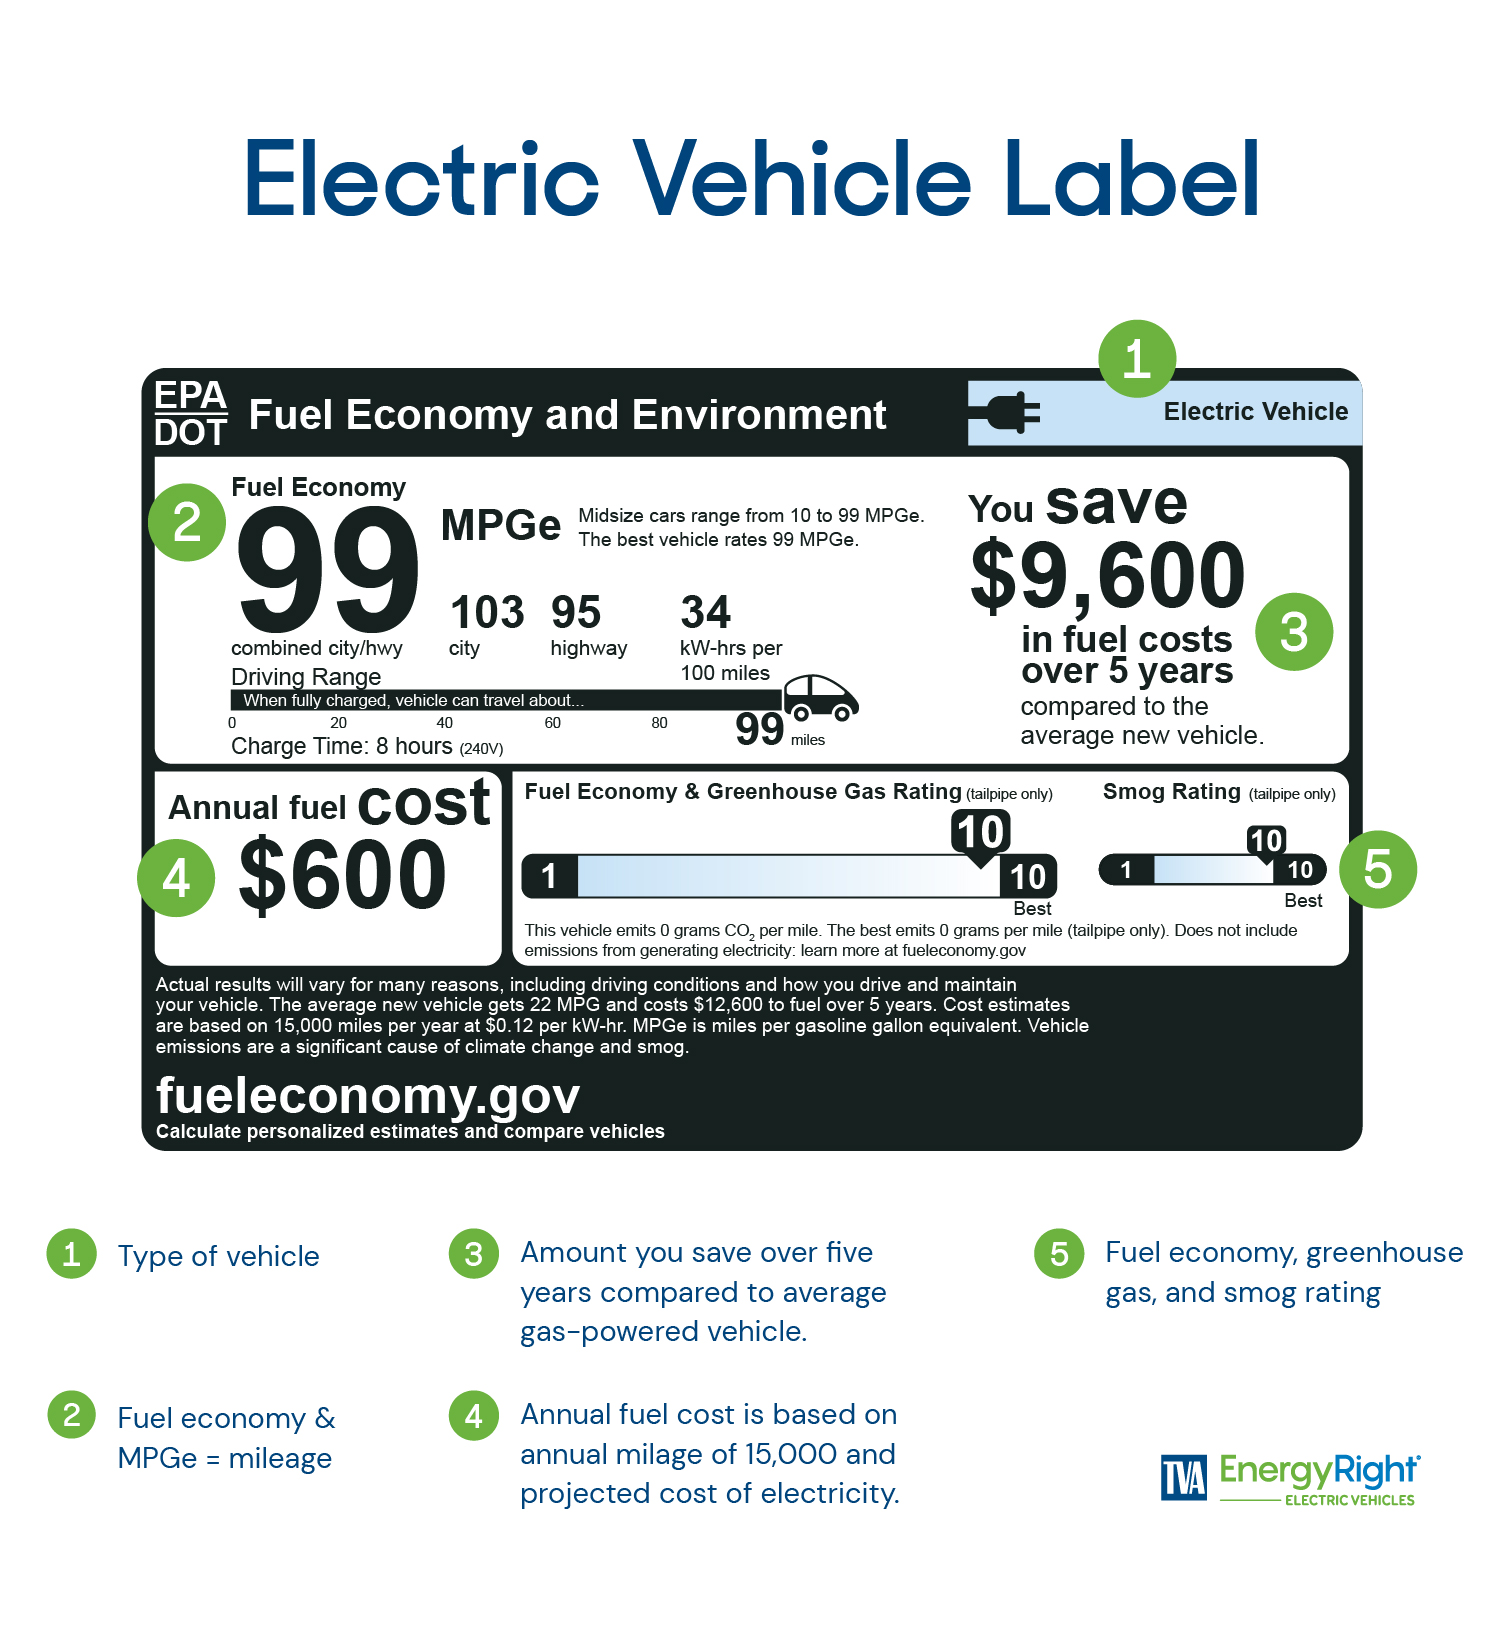 Mock up of an EPA window sticker for an electric vehicle.